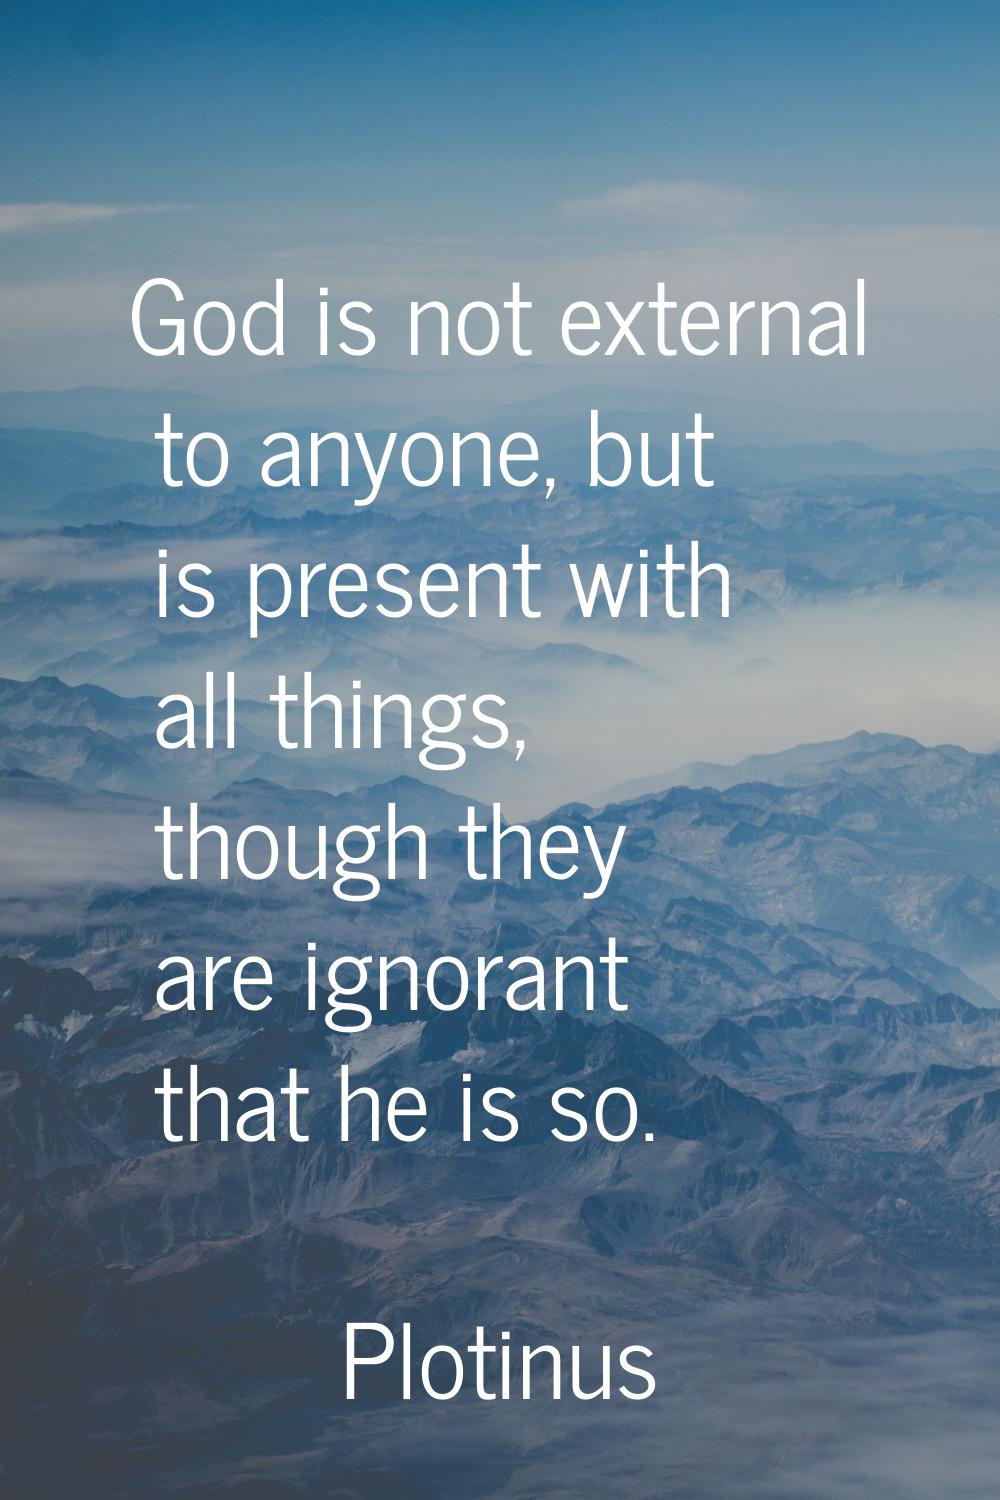 God is not external to anyone, but is present with all things, though they are ignorant that he is 